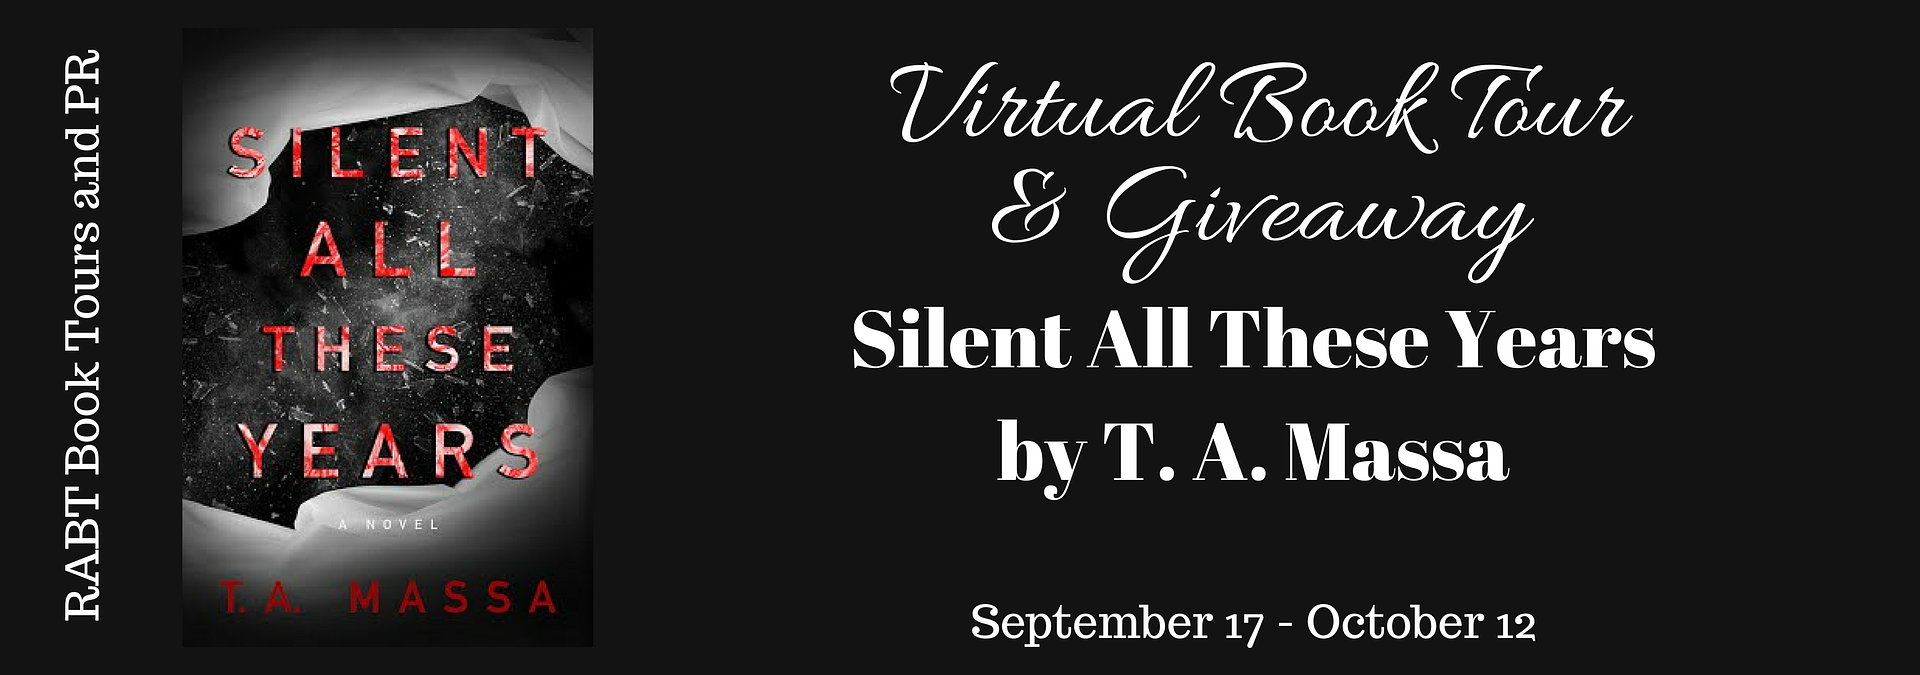 Virtual Book Tour: Silent All These Years by @TiffaniMassa #interview with the Author and a #giveaway